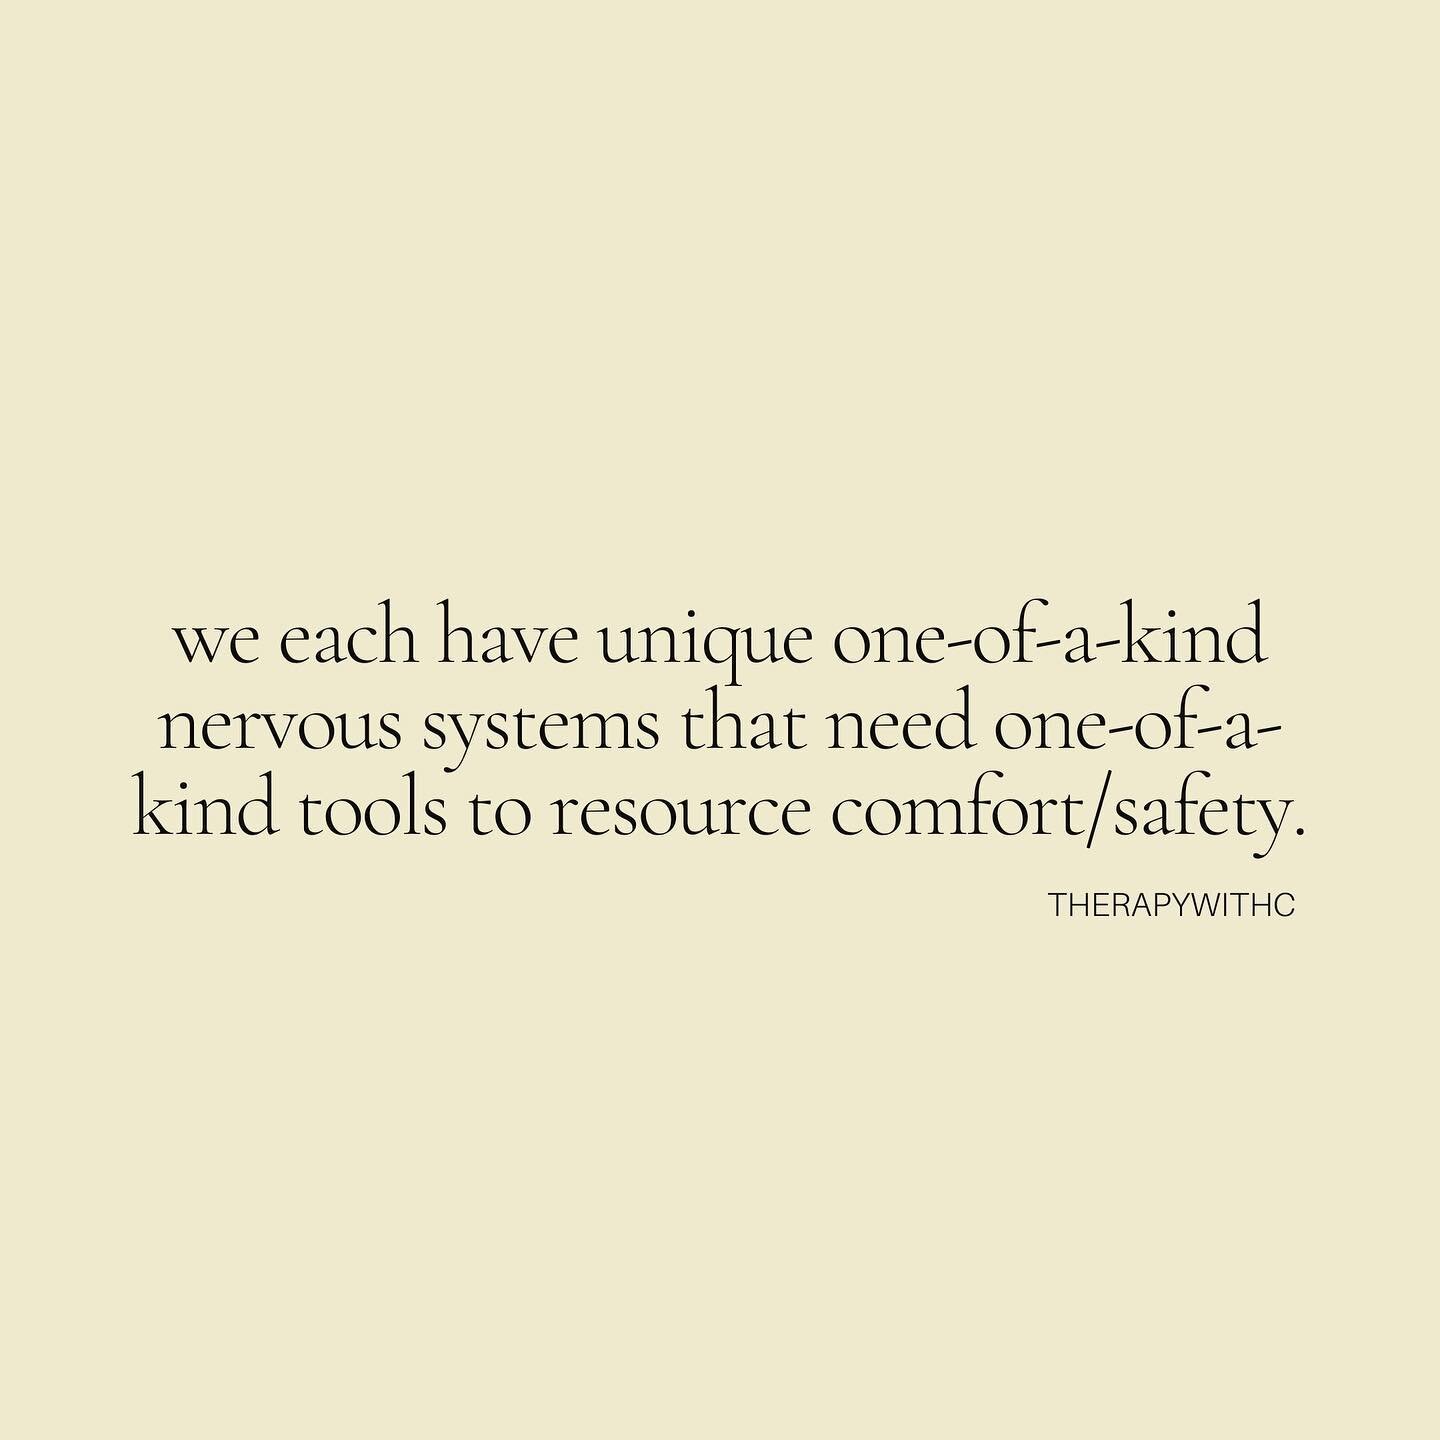 One of my favorite things to explain to clients is the undeniable truth that our brains and nervous systems were/are knitted together by our experiences. Your childhood really matters ☺️ There is no single being on this earth that has the exact same 